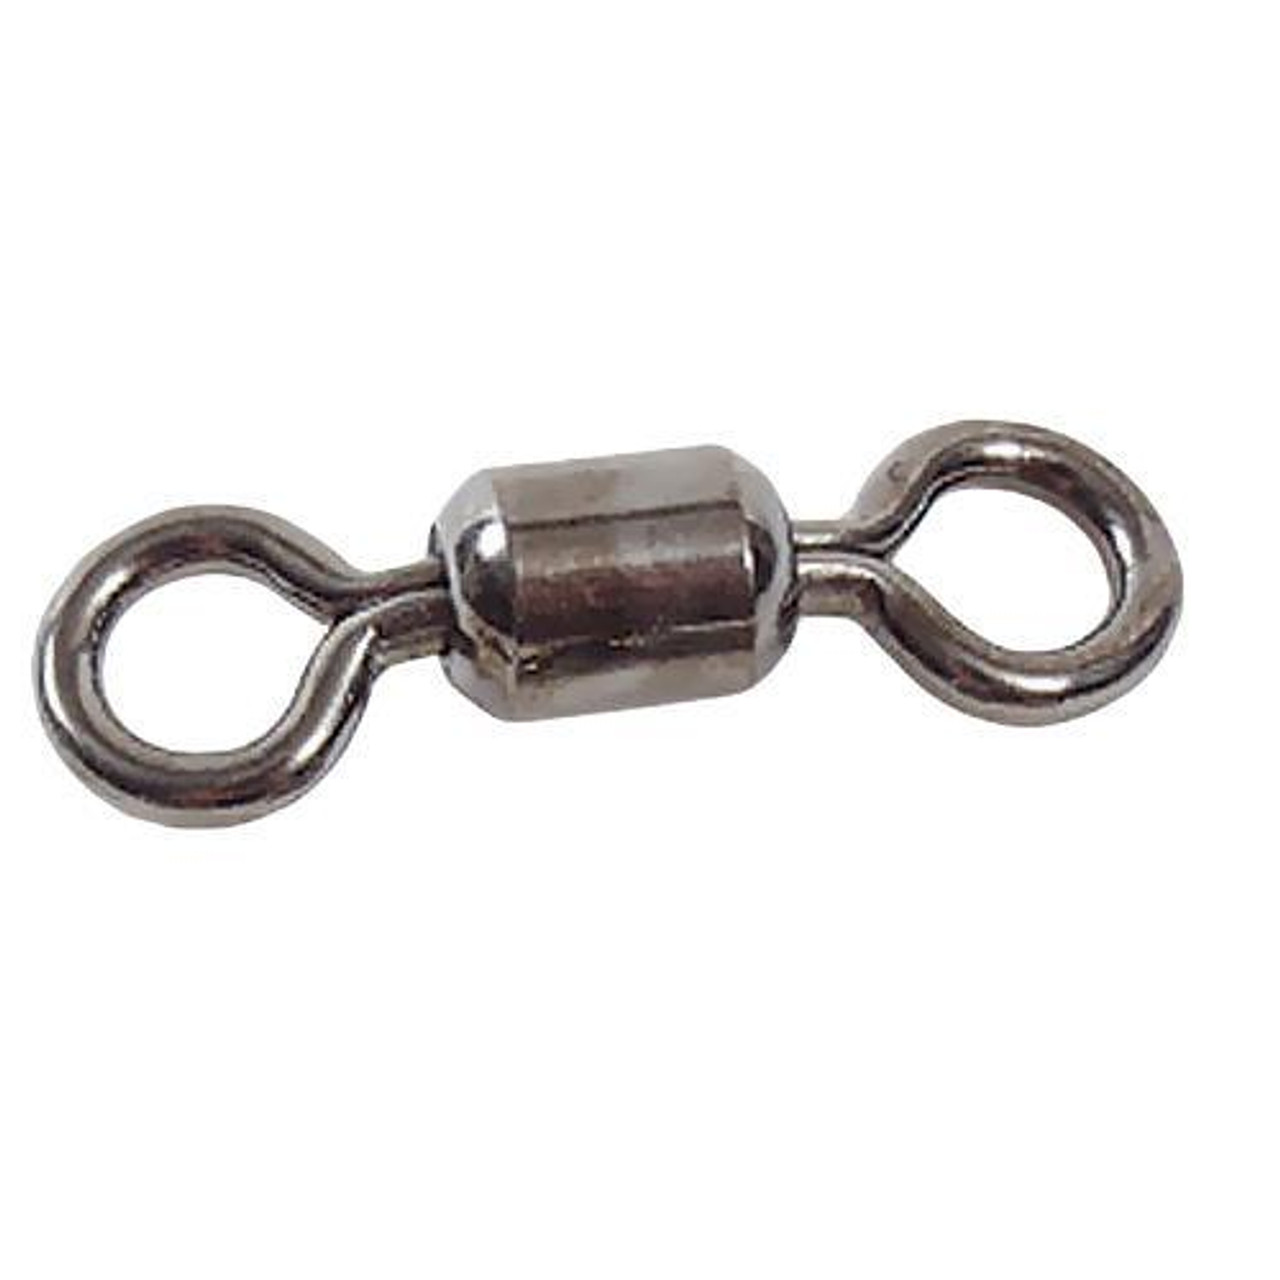  50 Pack Fishing Barrel Swivel Snaps, Safety Snap